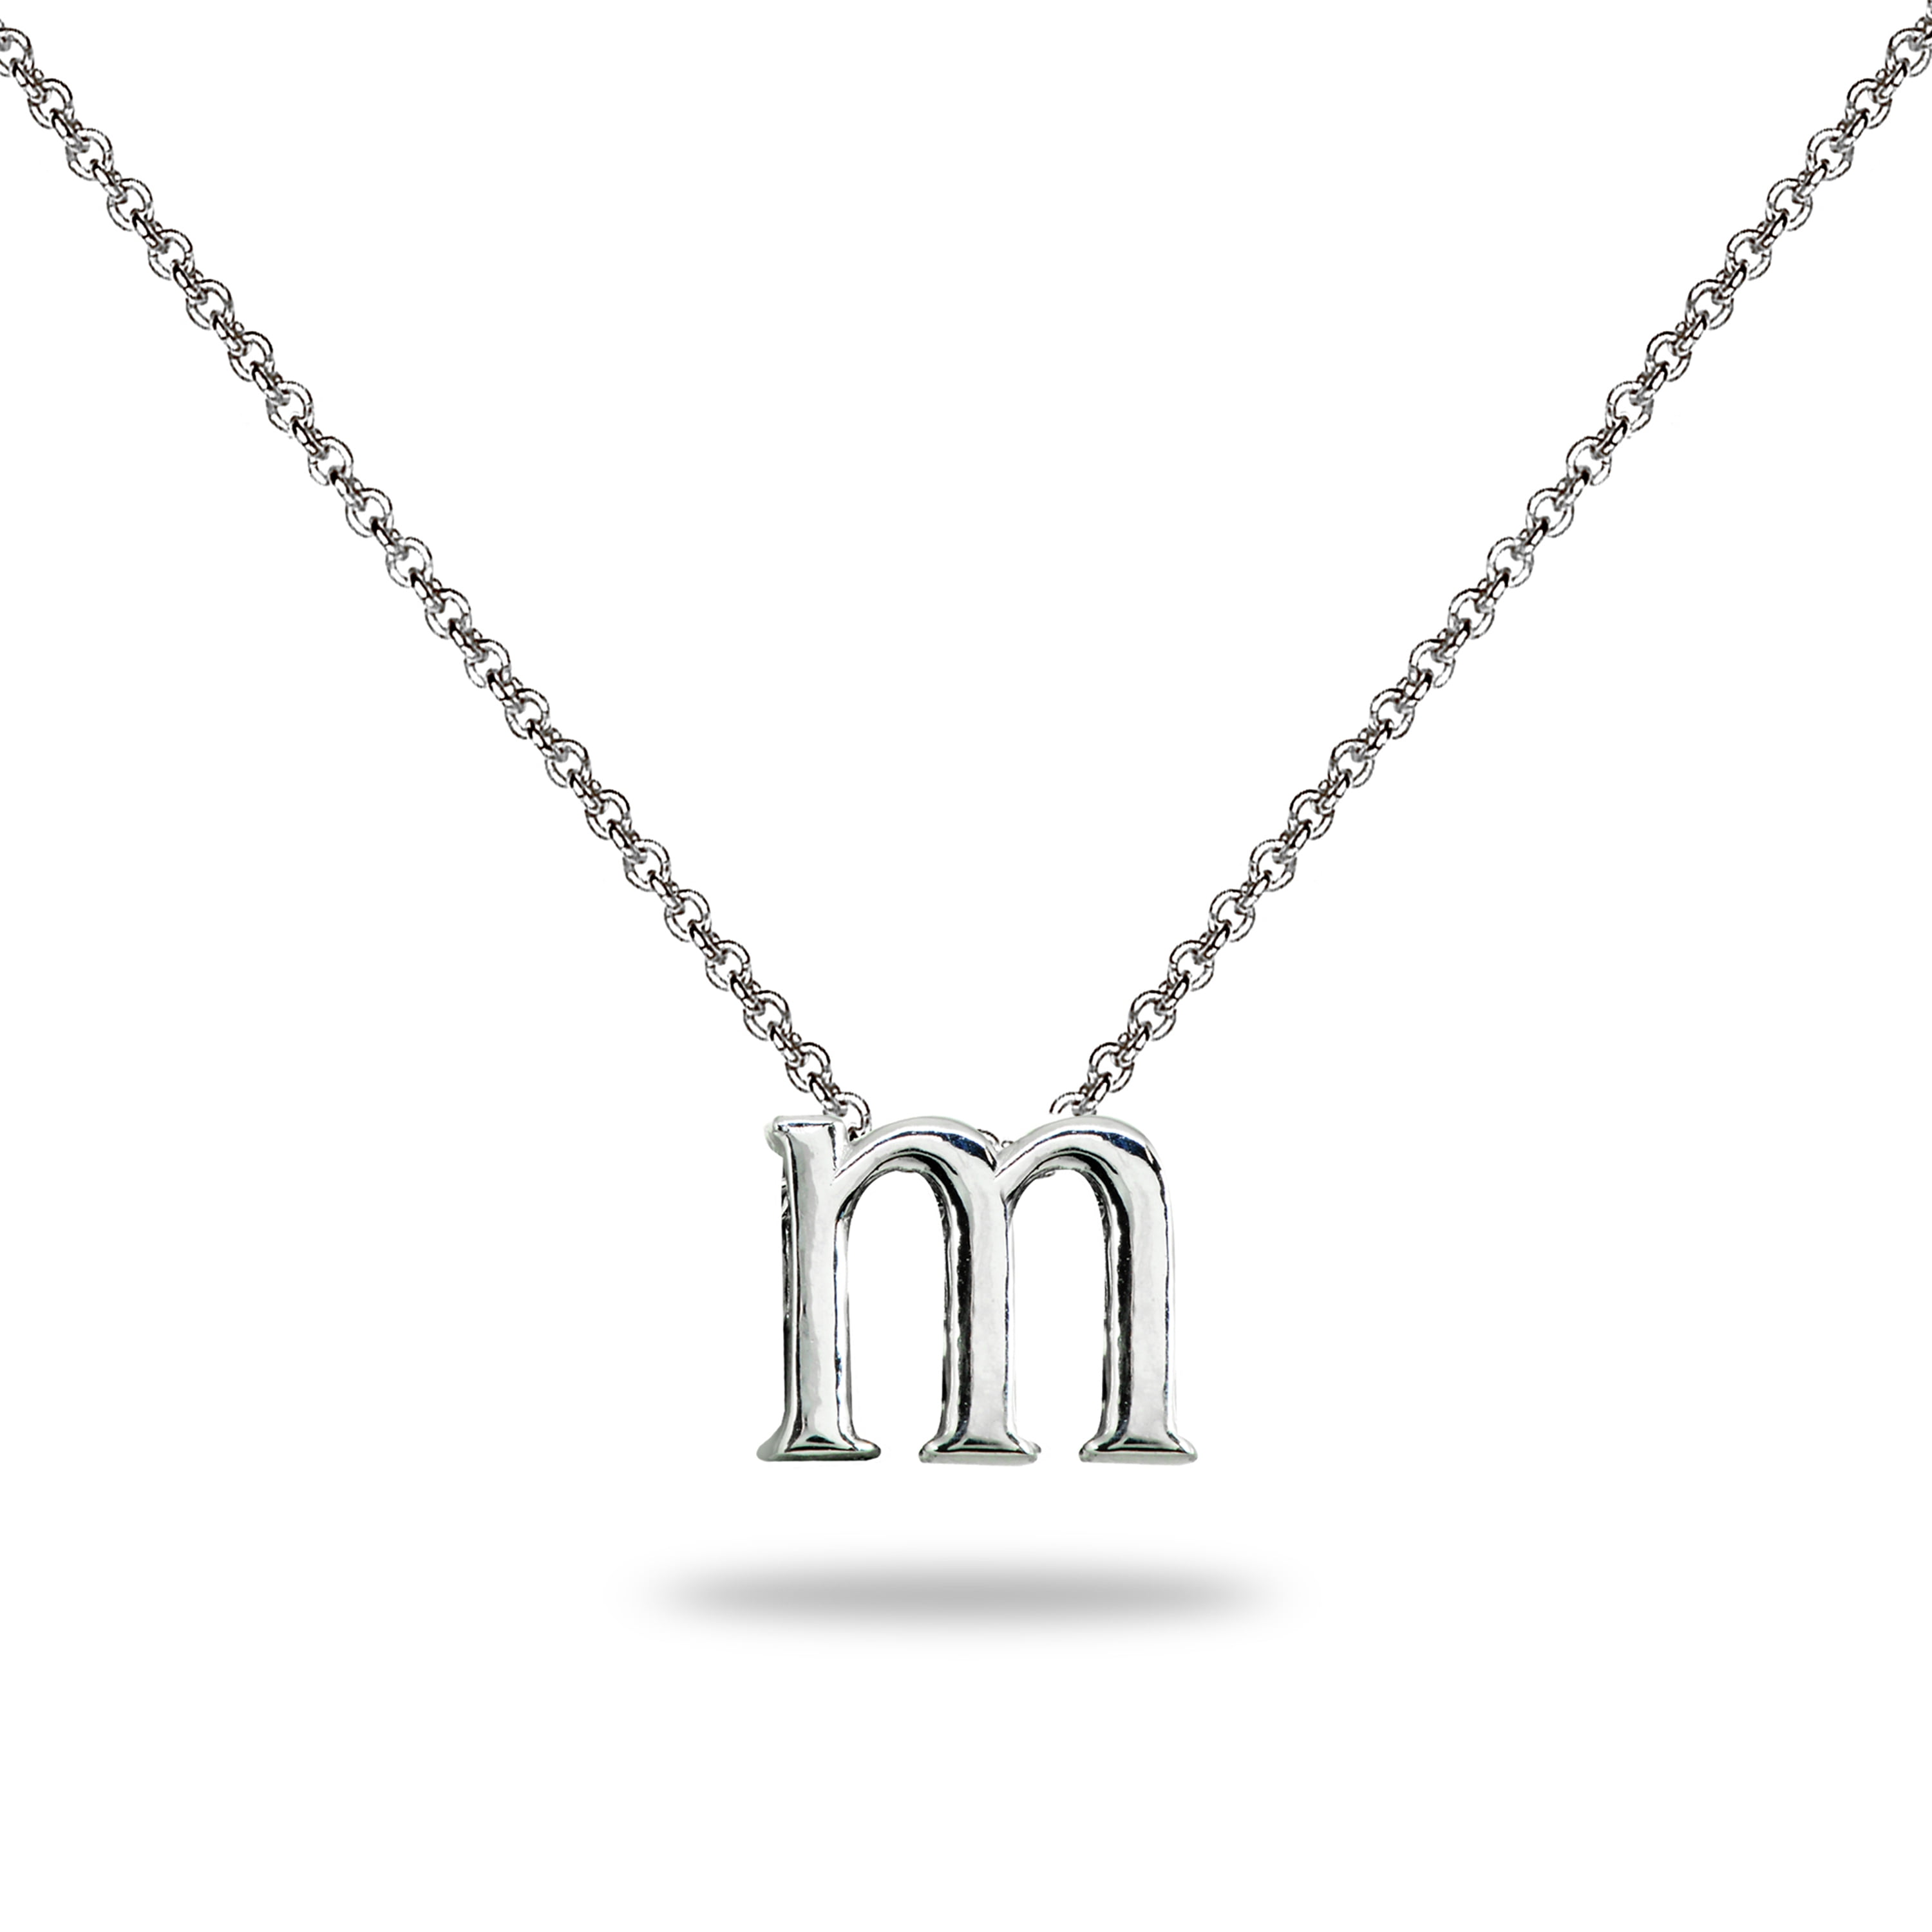 14K SOLID YELLOW GOLD INITIAL NECKLACE, LETTER M NECKLACE | eBay